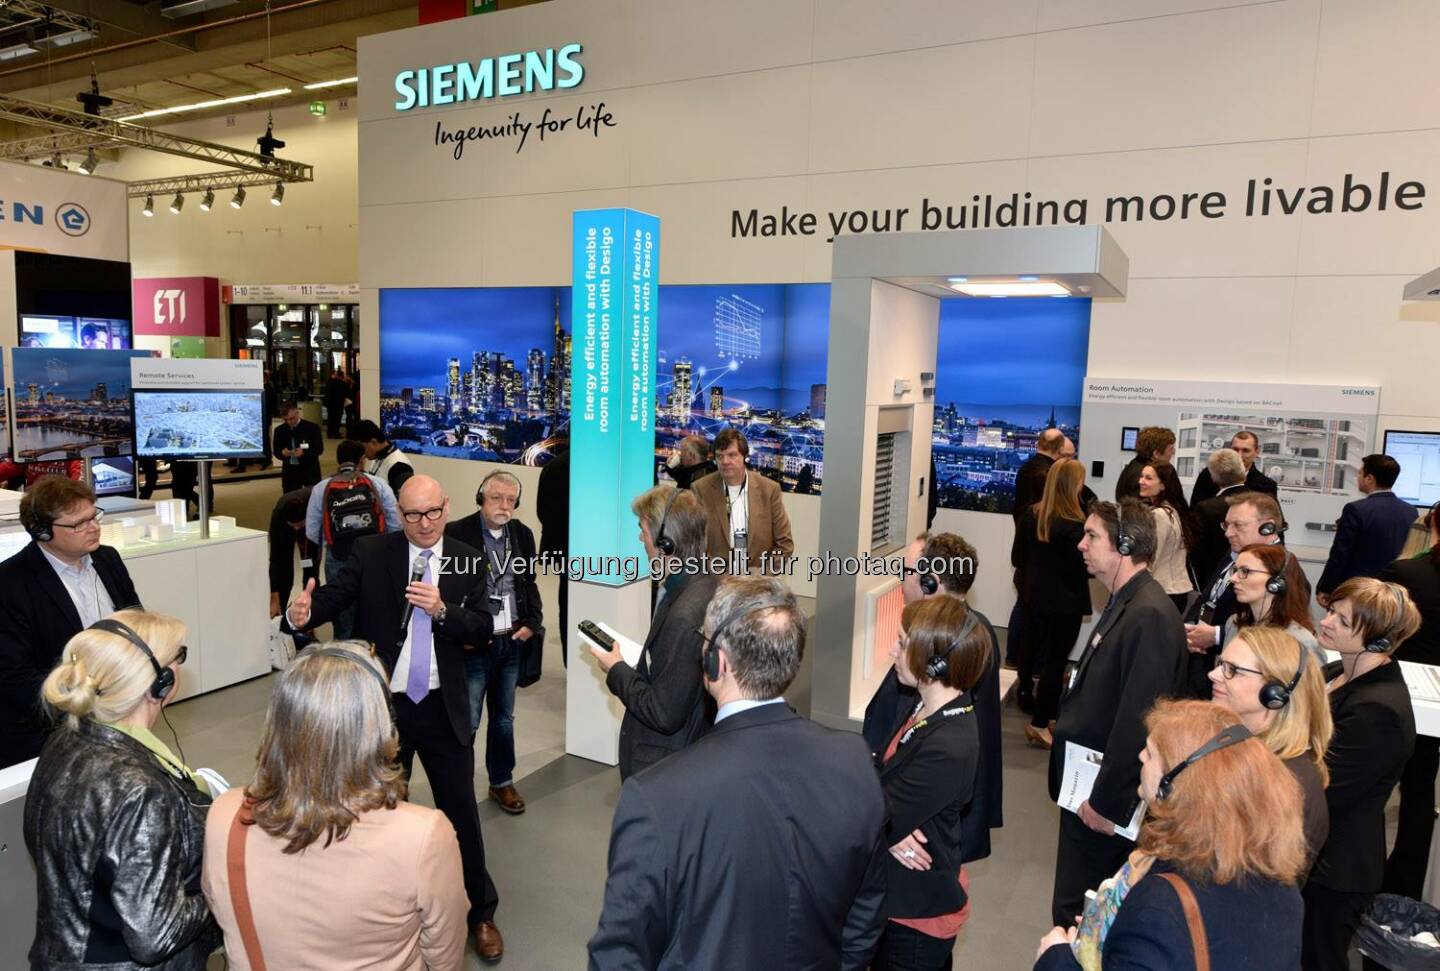 Siemens Over 40 journalists visited our press day at Light + Building 2016, learning more about Siemens’ solutions for intelligent and efficient buildings. Thank you! http://sie.ag/22j2RTY  Source: http://facebook.com/Siemens